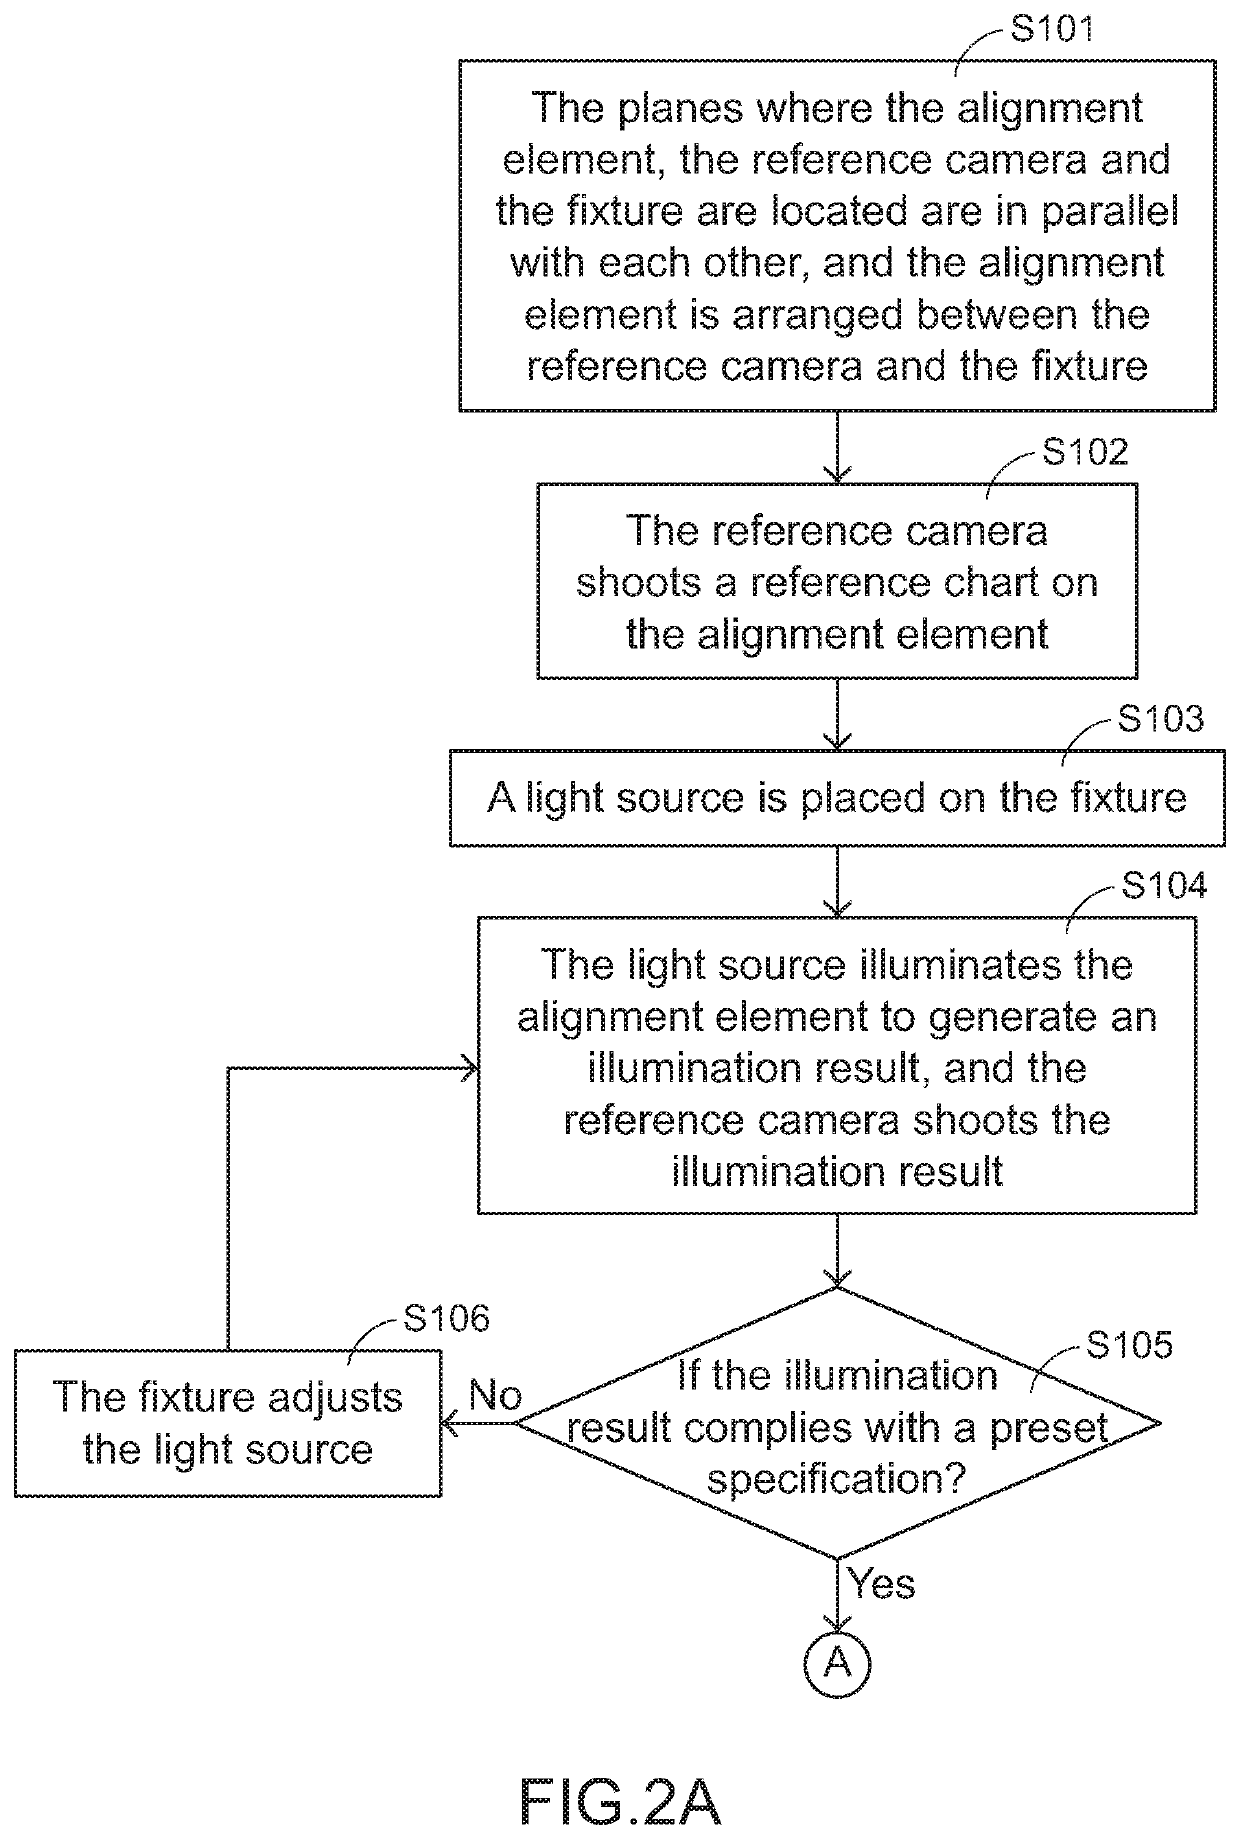 Method for aligning camera lens with light source